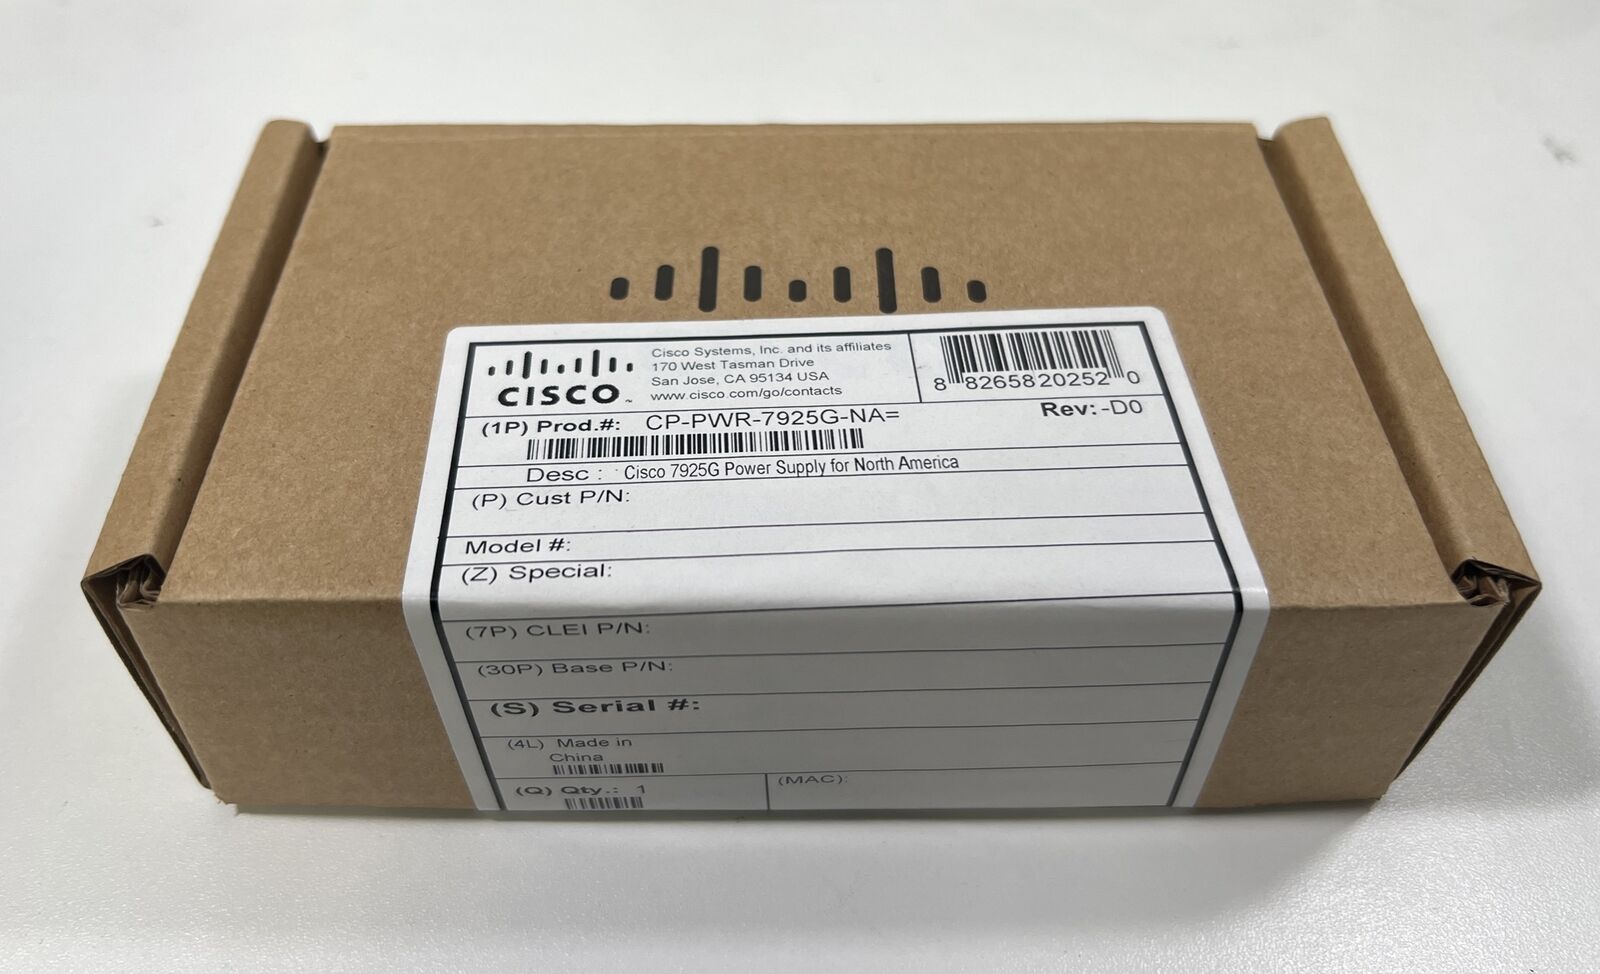 NEW Cisco CP-PWR-7925G-NA= Power Supply